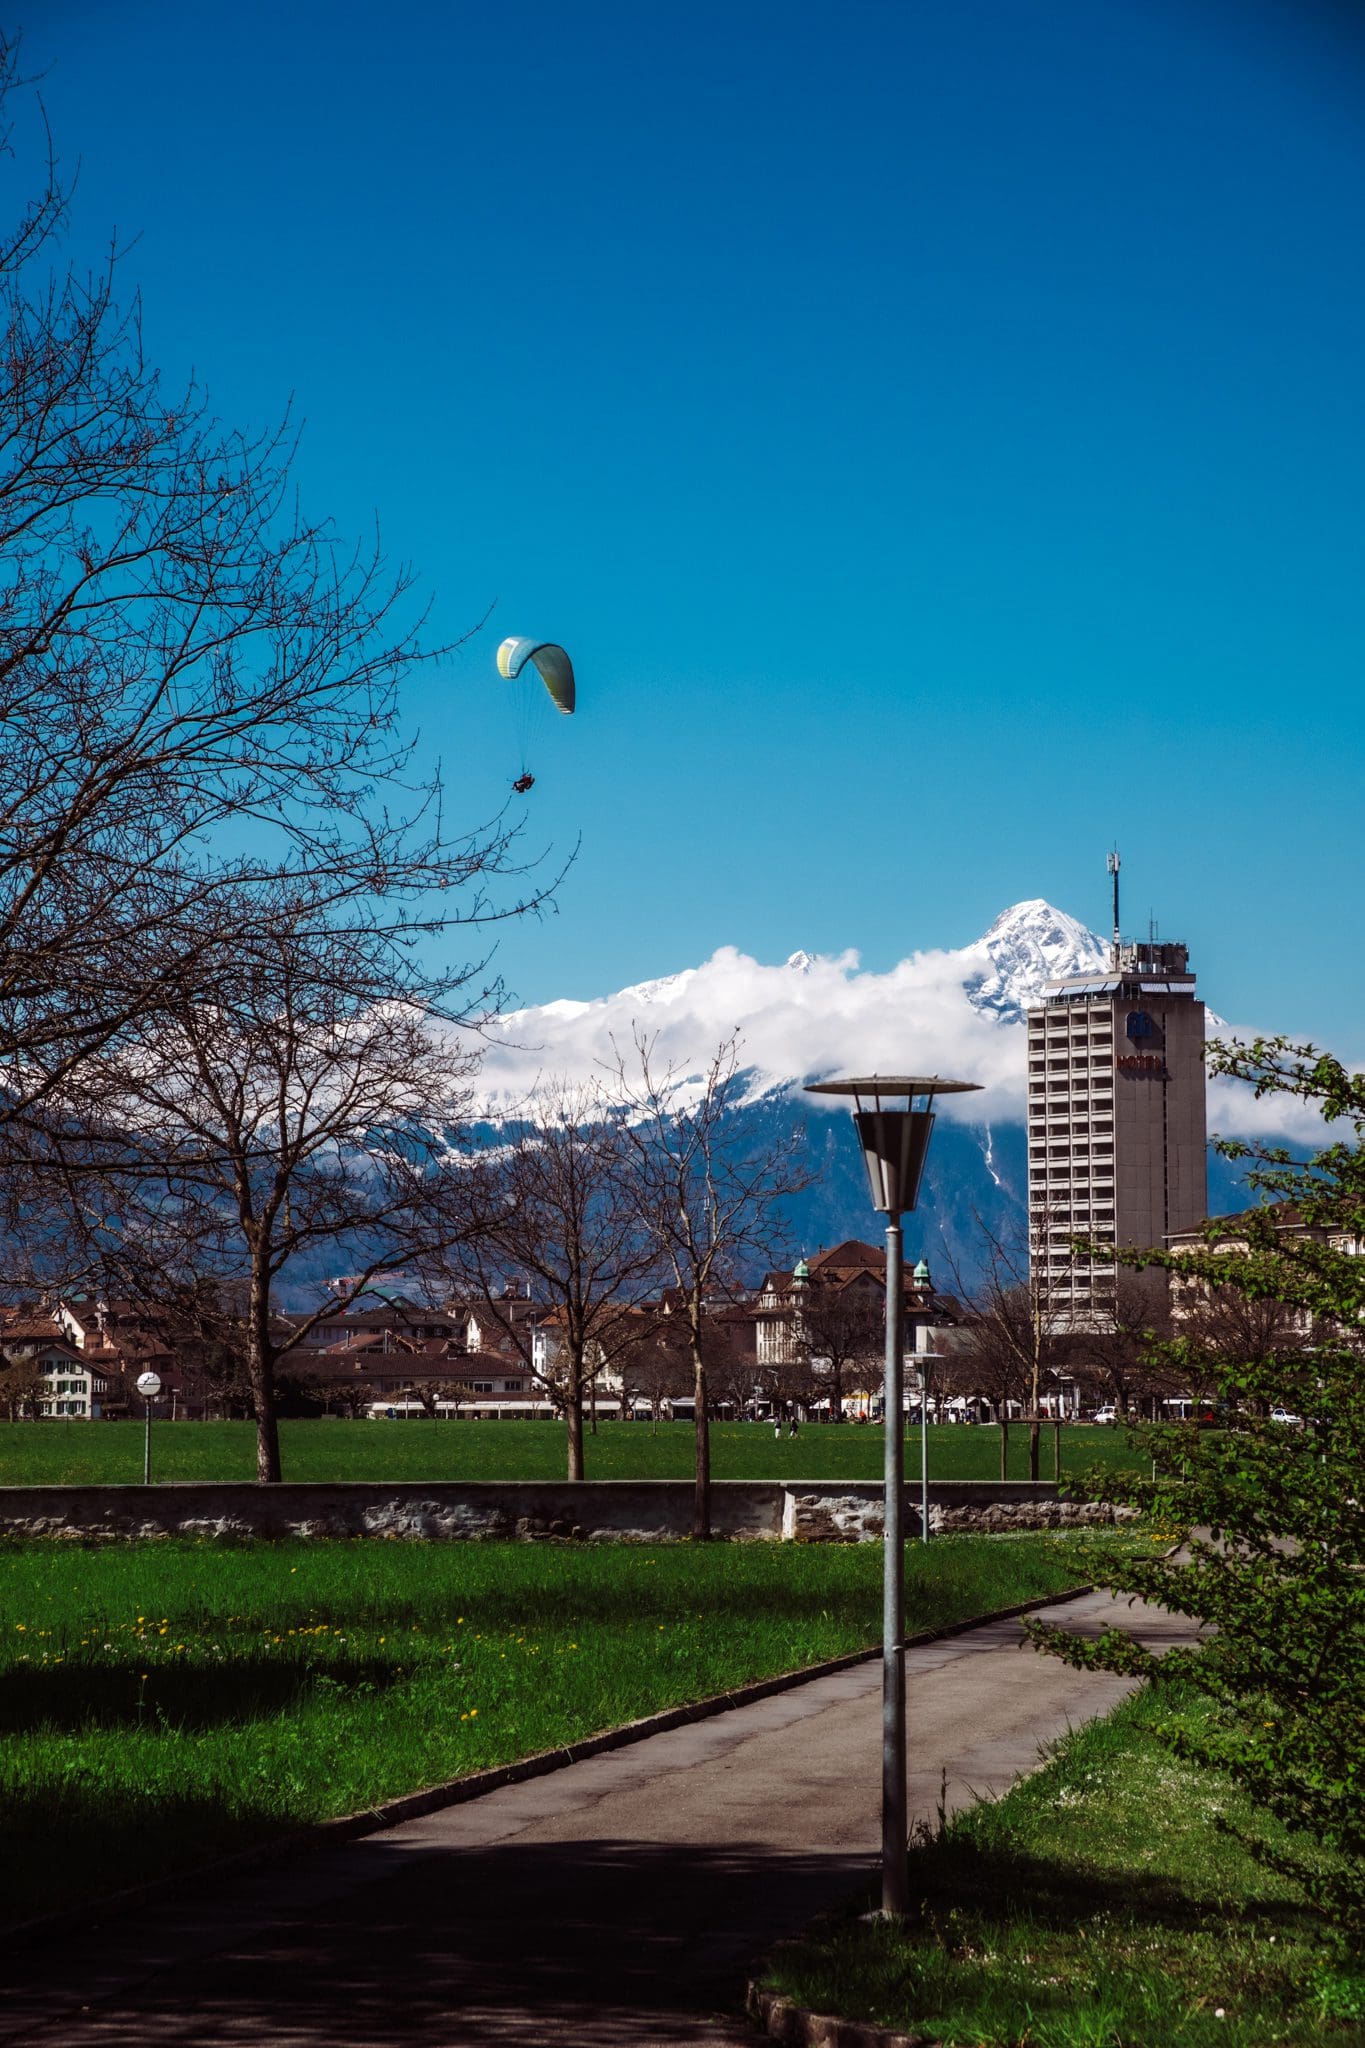 Höhematte park Interlaken is the best place to watch the paragliders